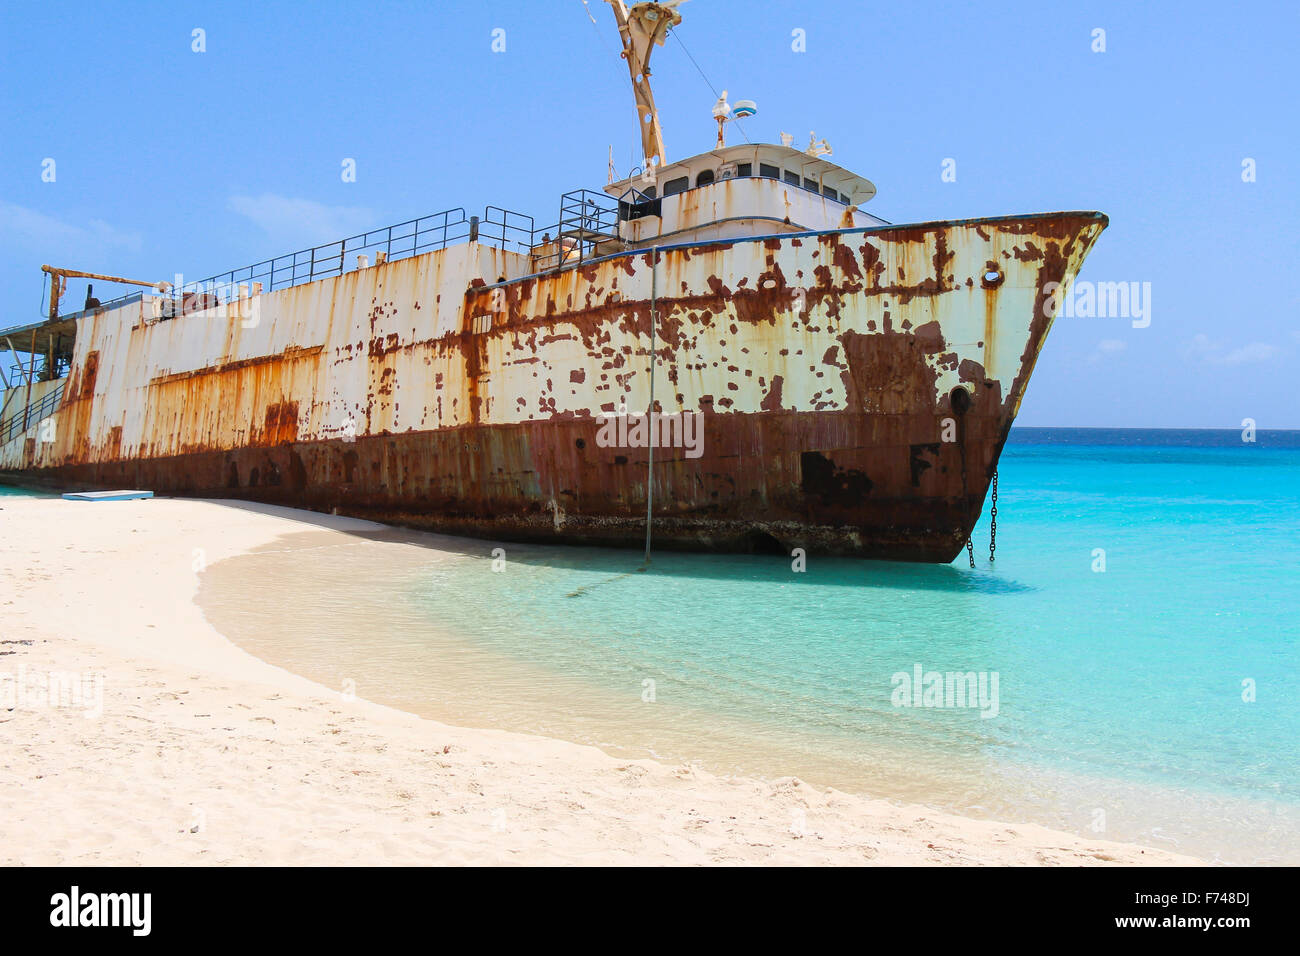 Stranded Shipwreck on Caribbean Beach, Turks and Caicos Islands Stock Photo